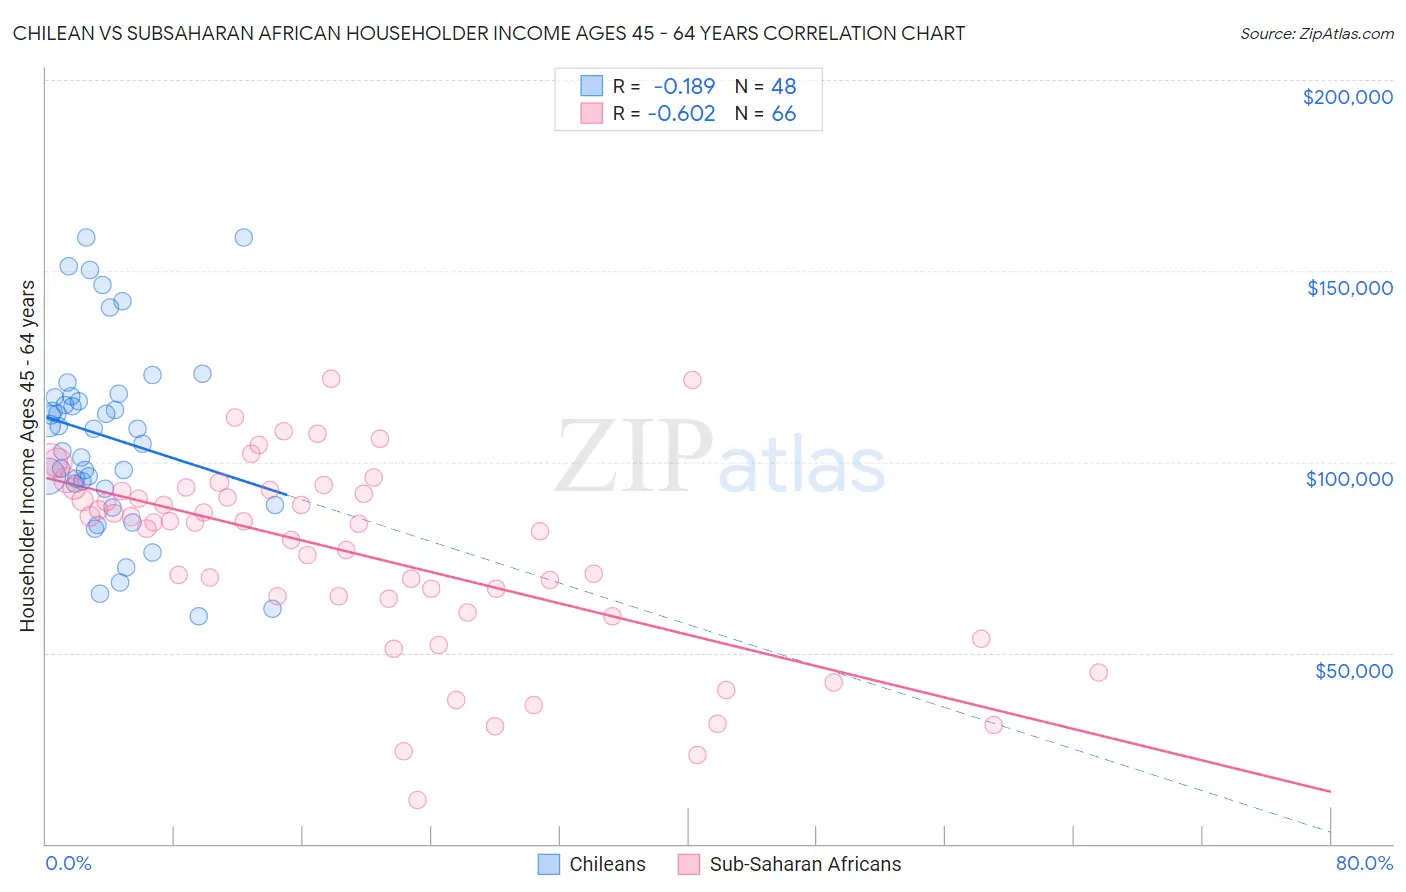 Chilean vs Subsaharan African Householder Income Ages 45 - 64 years